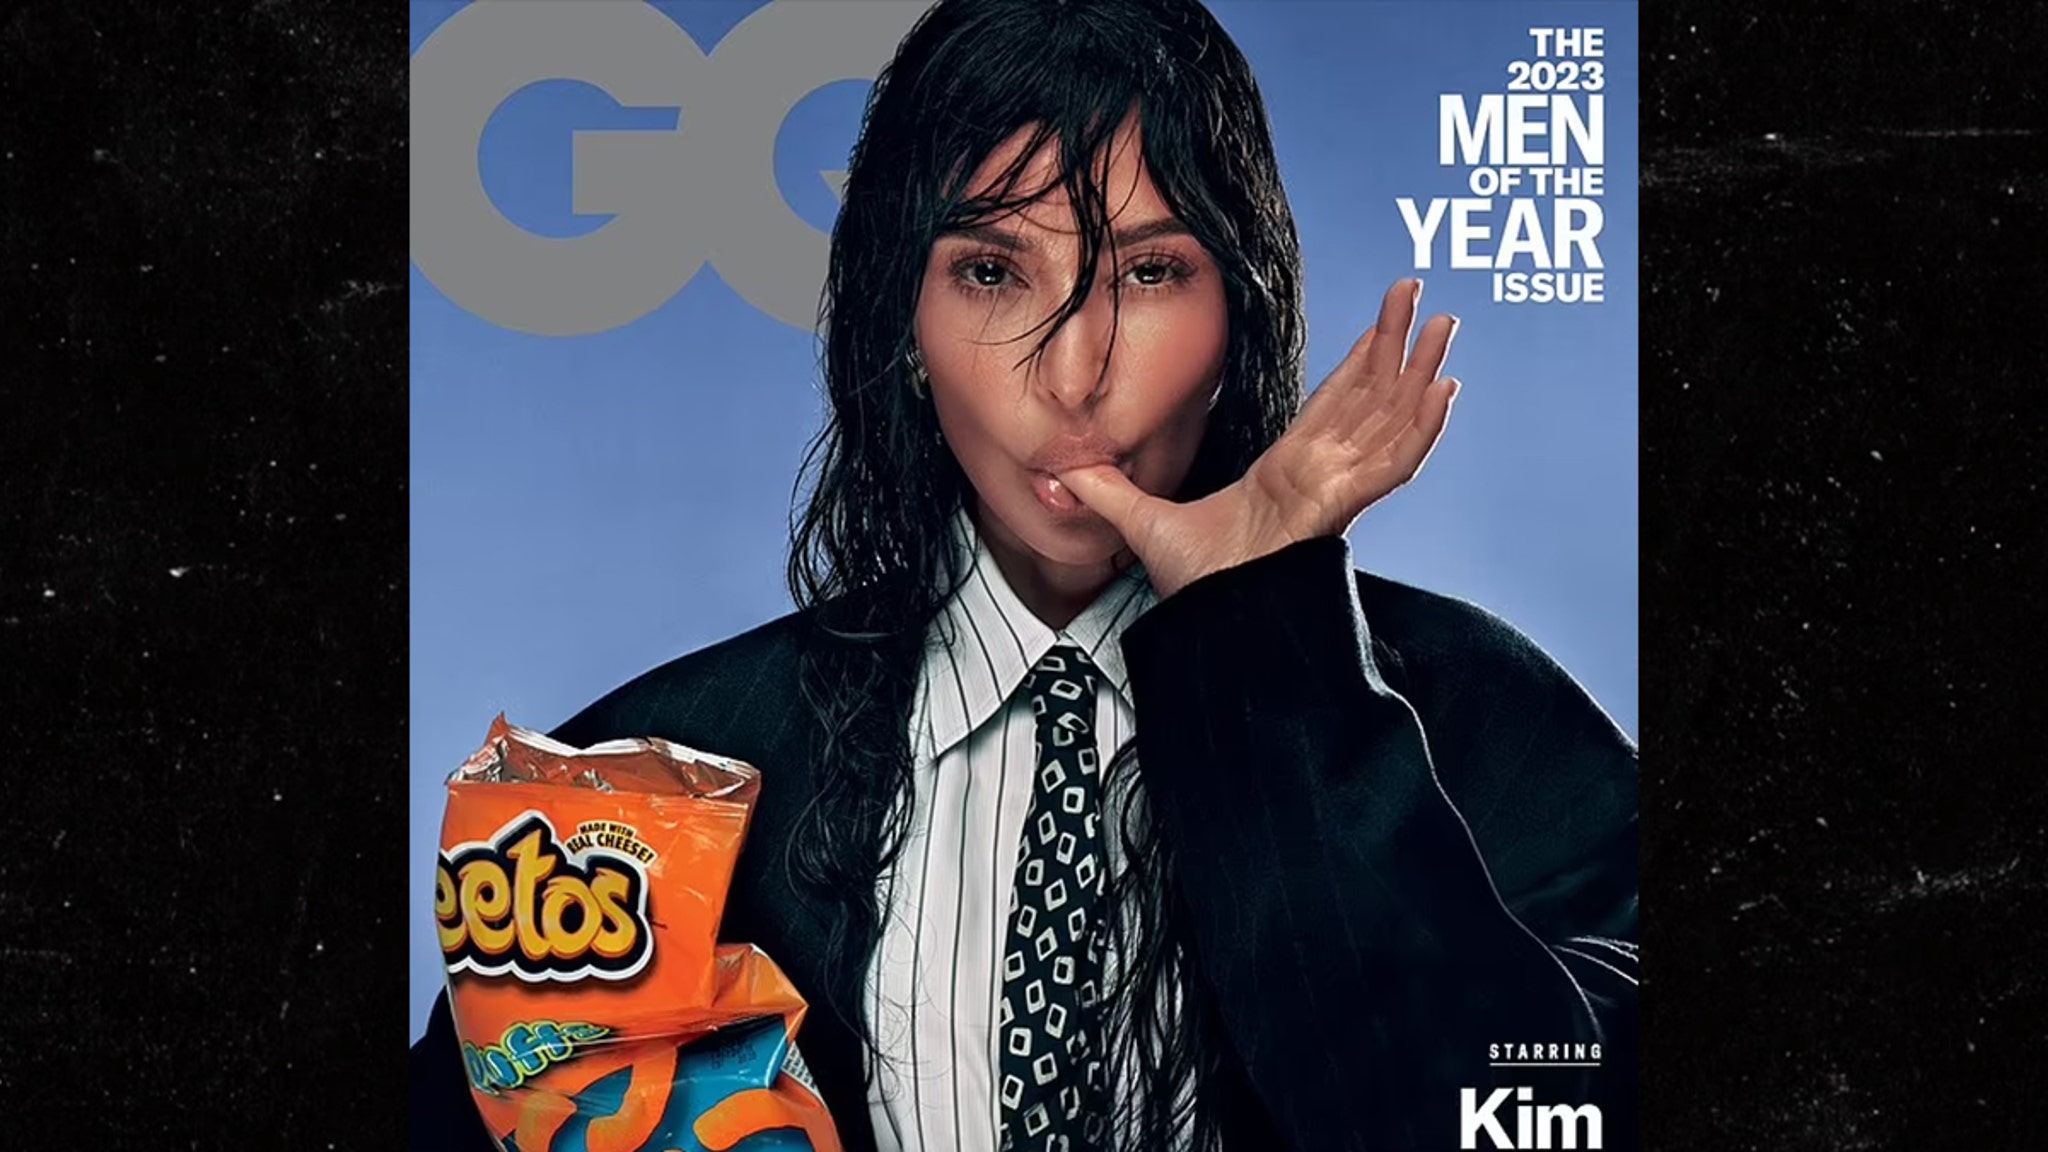 GQ’s ‘Men of the Year’ List Populated by Women Sparks Backlash